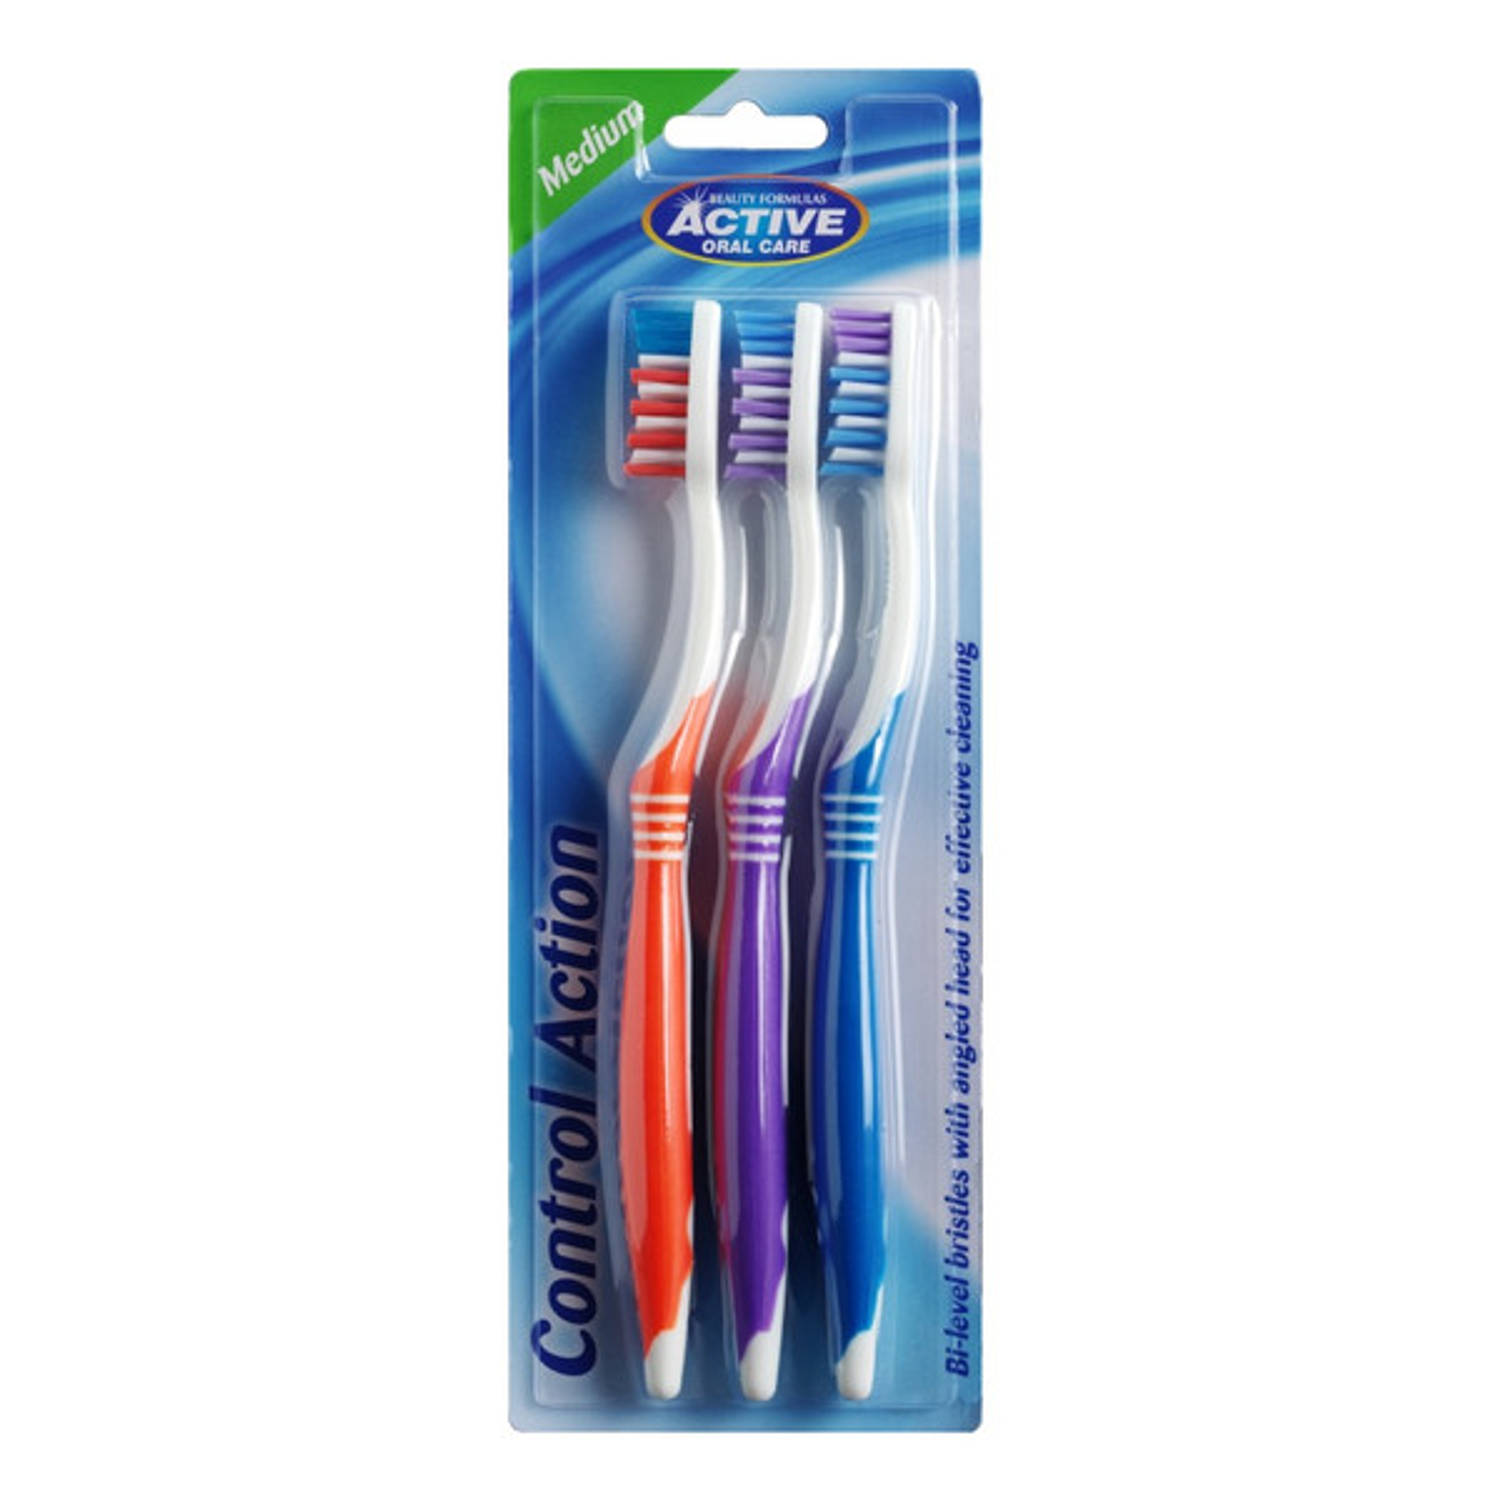 Active Oral Care - Control Action Toothbrushes Medium 3 Pcs.